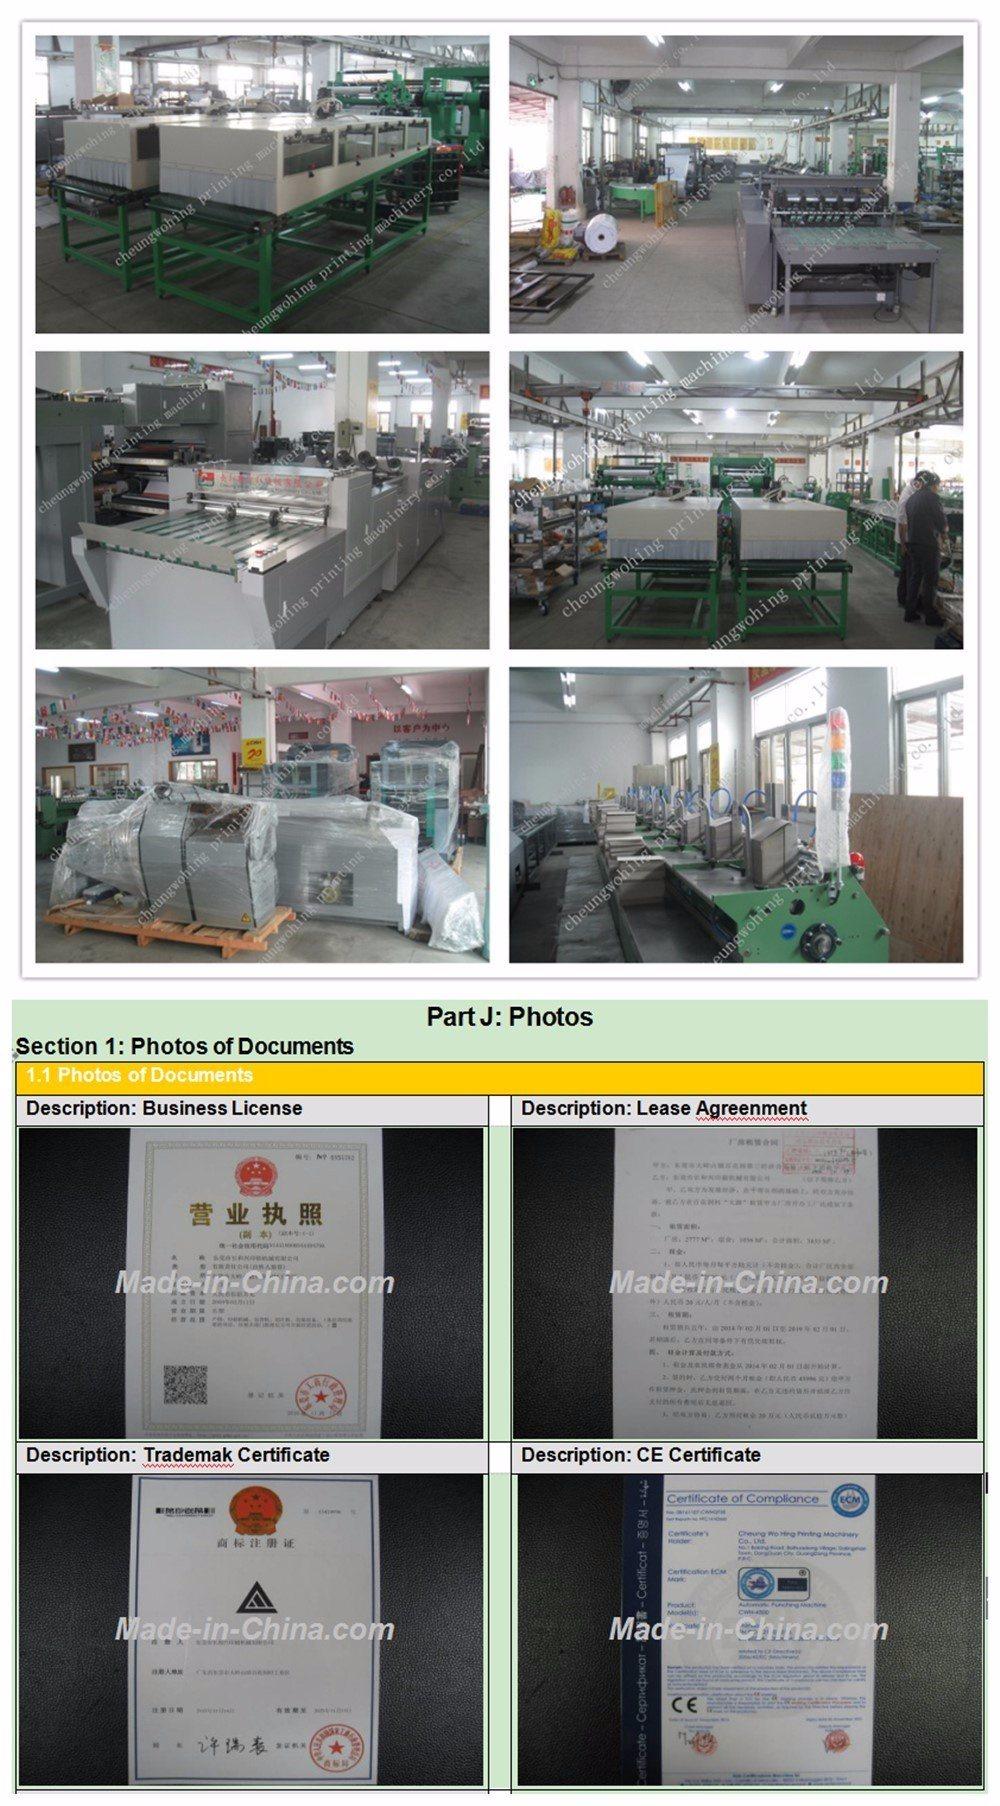 CF-600an Auto Sewing Folding Paper Exercise Book Printing Machine